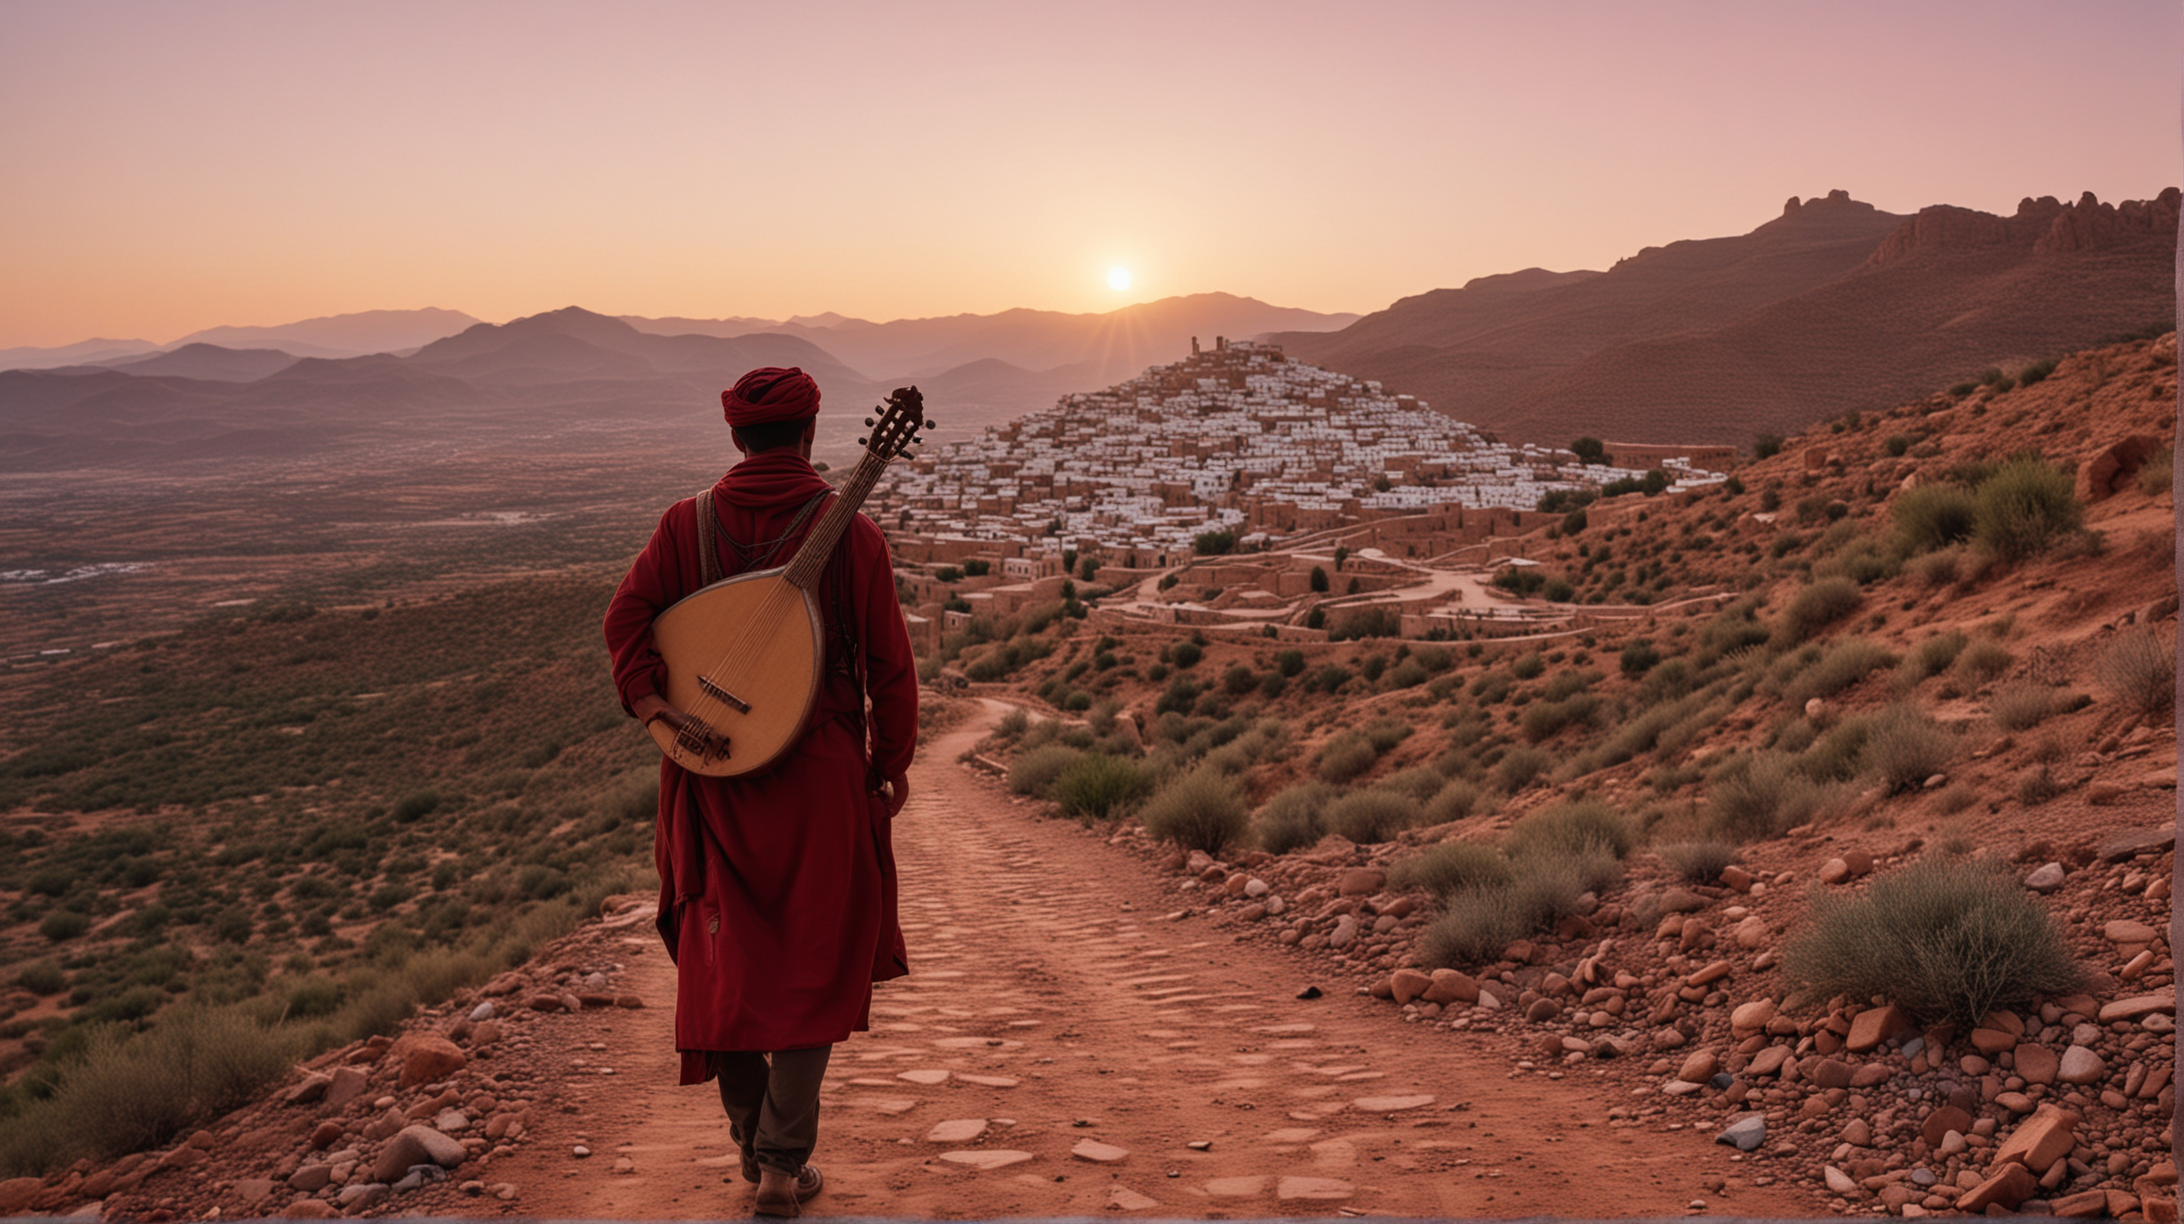 Moroccan Musician Walking with Lute at Sunset